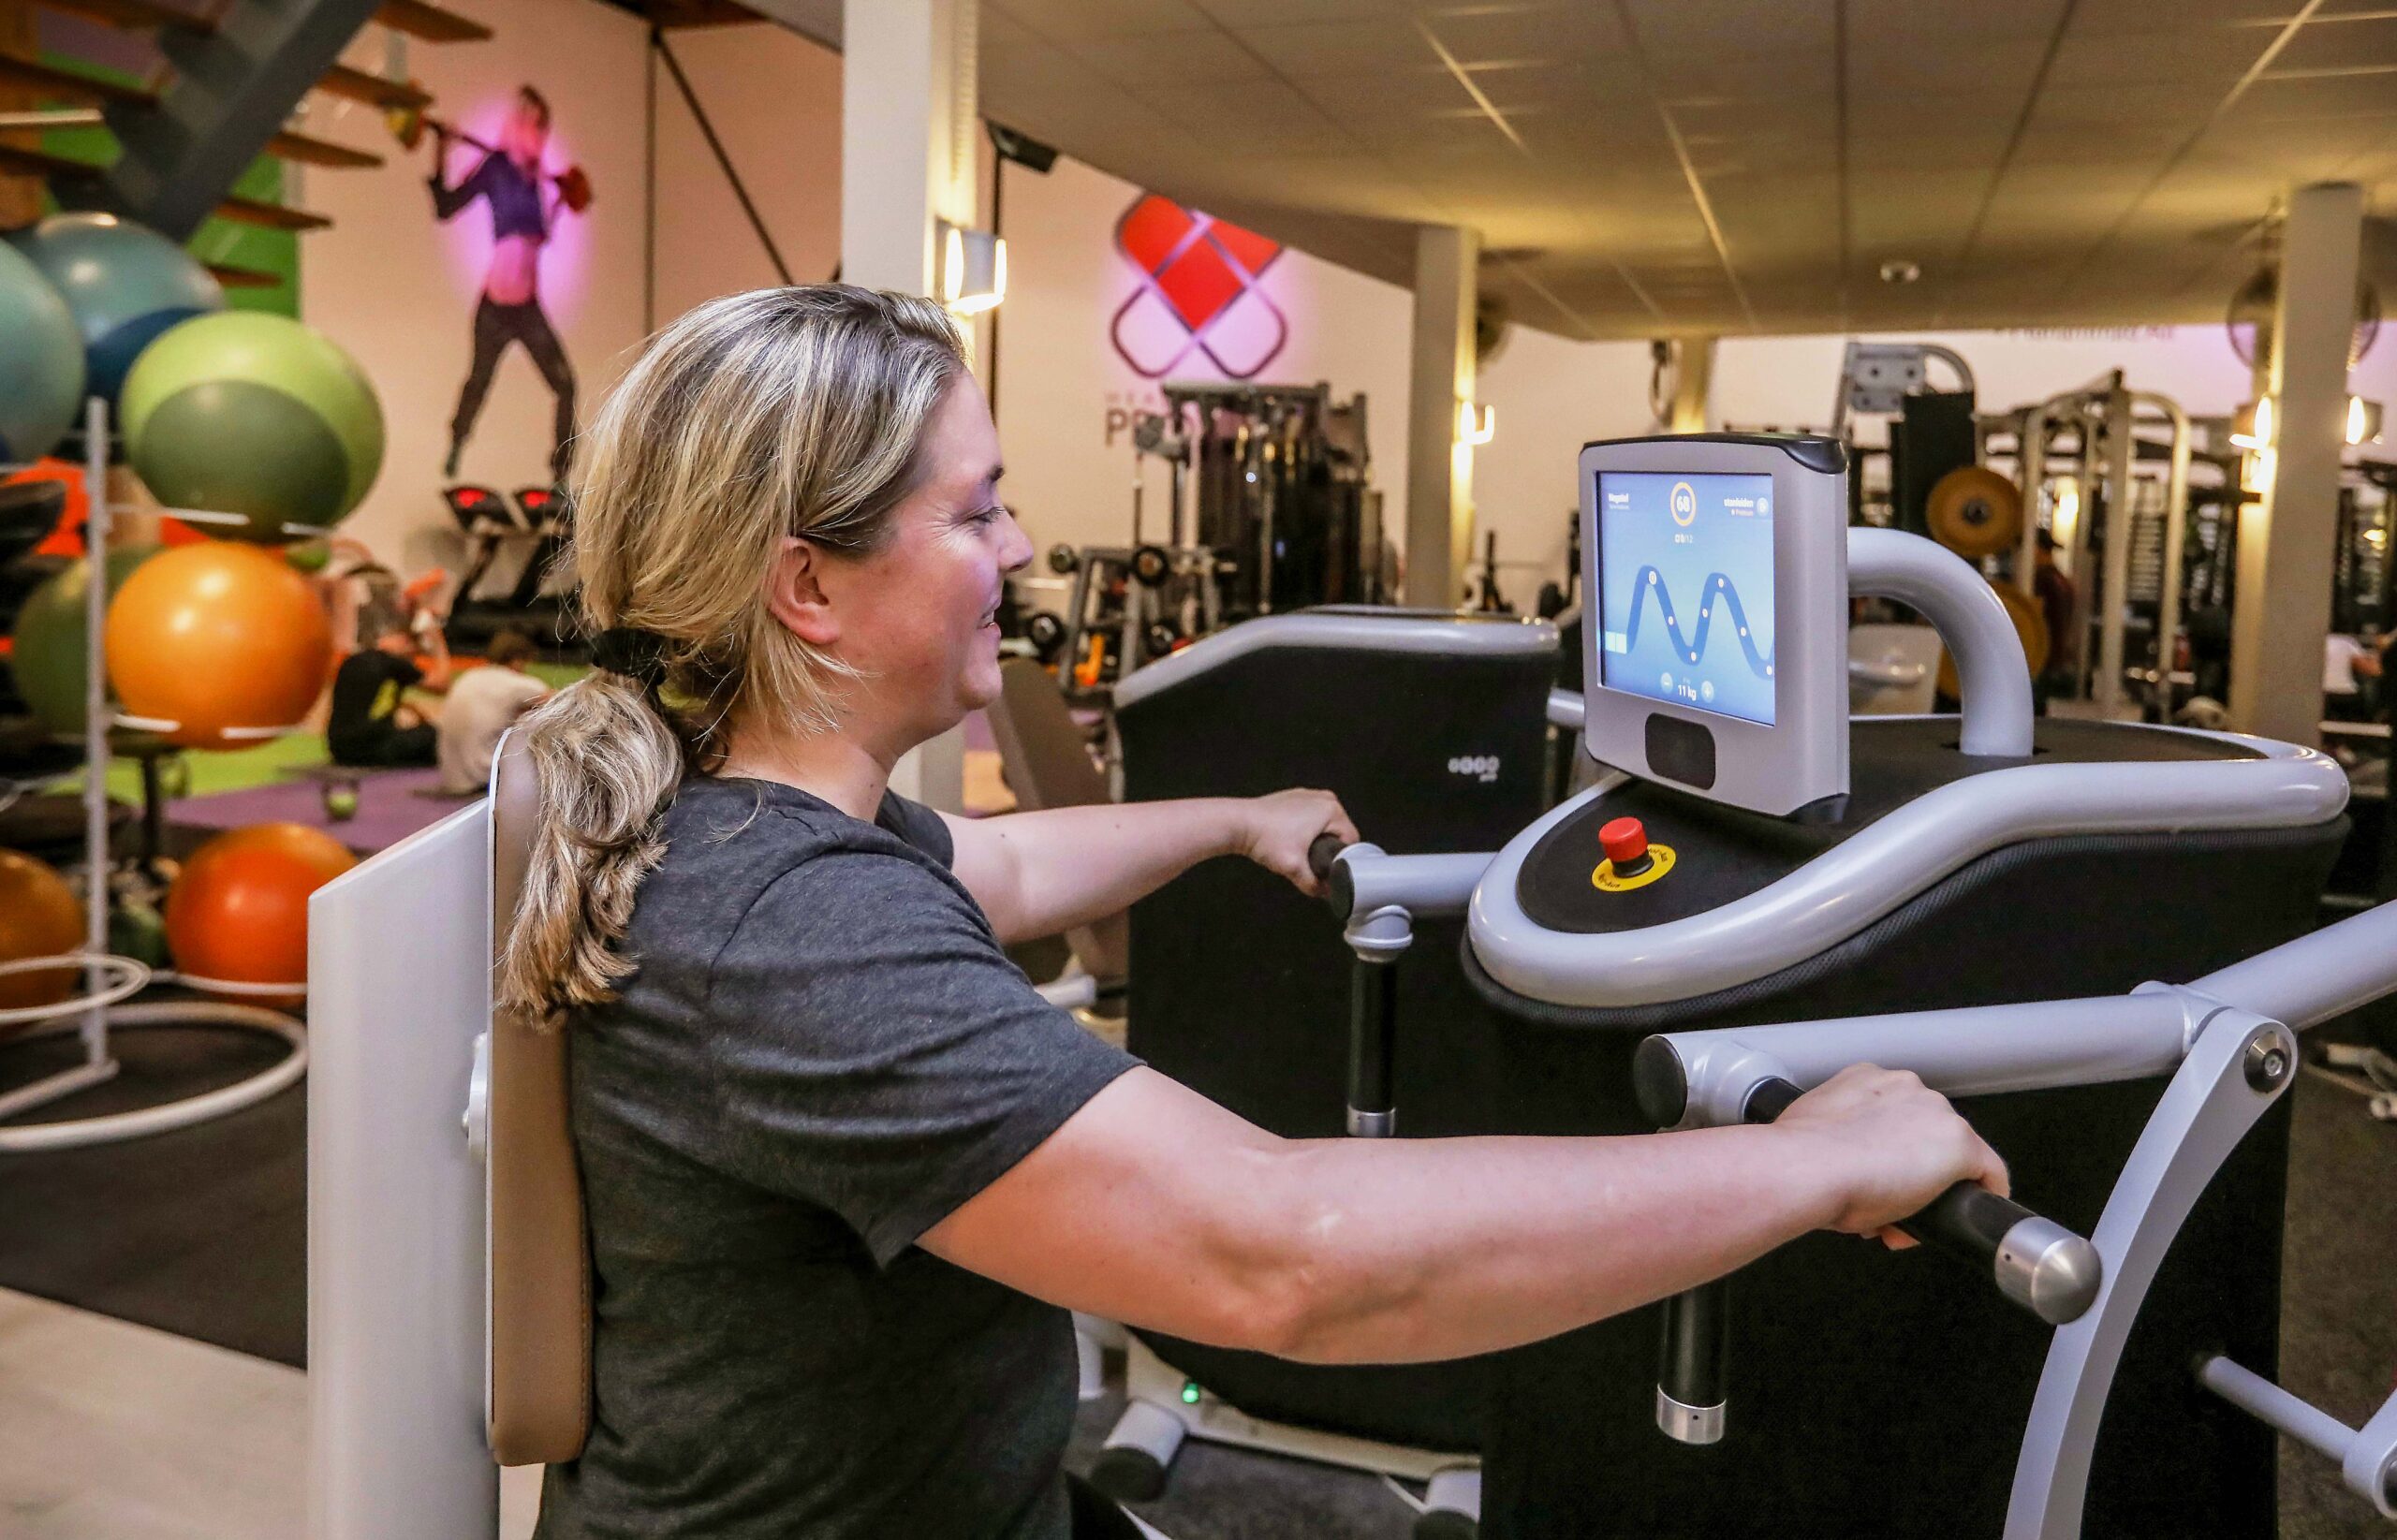 eGym: Fit in 30 minuten per training